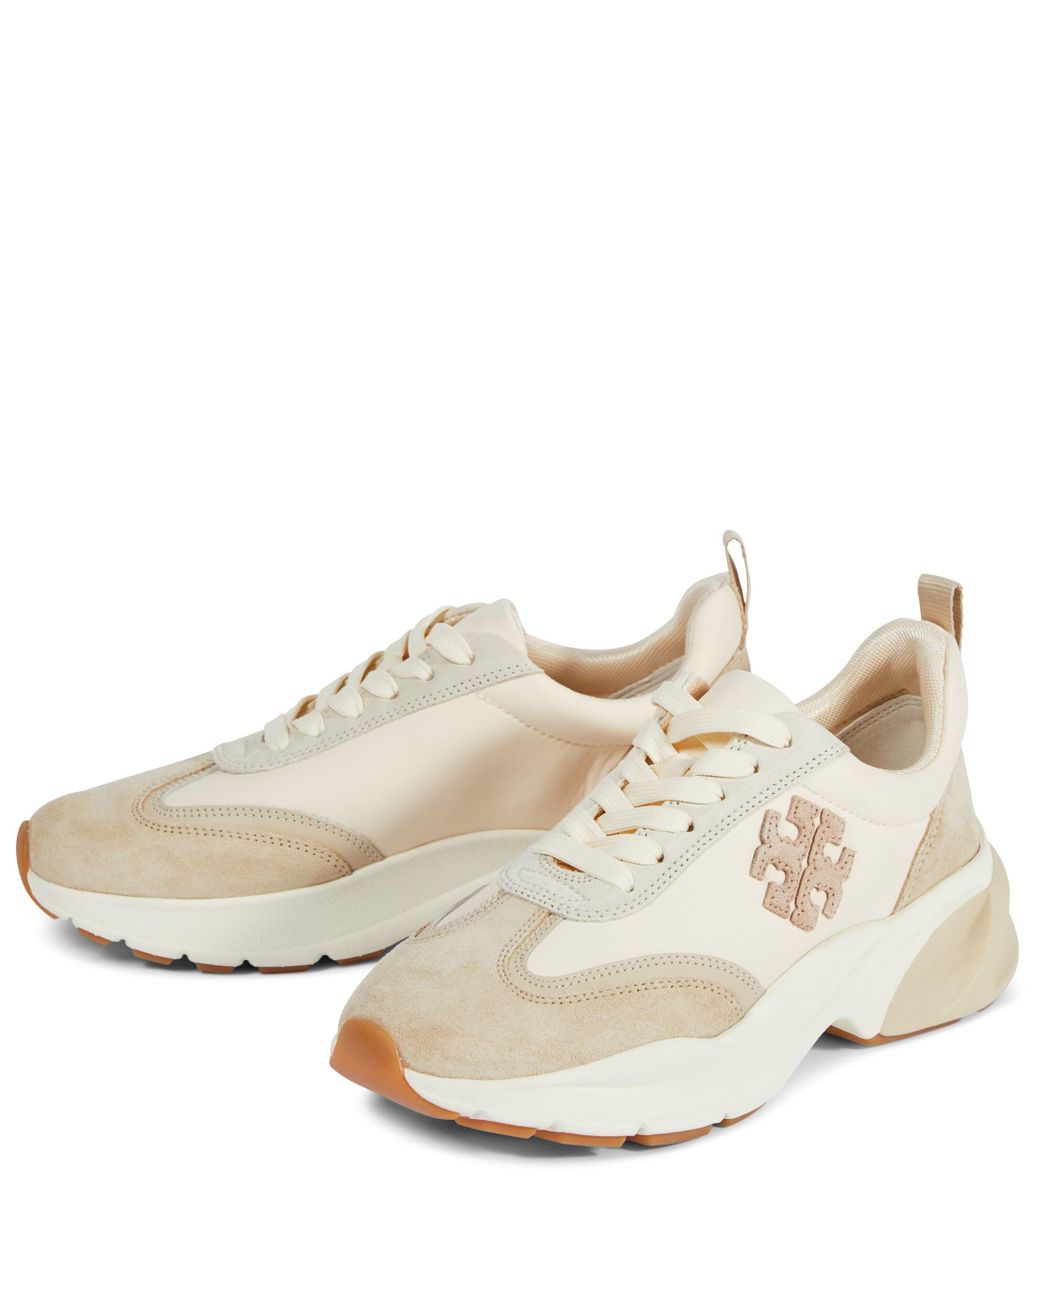 Tory Burch Leather And Suede Sneakers | Lyst UK